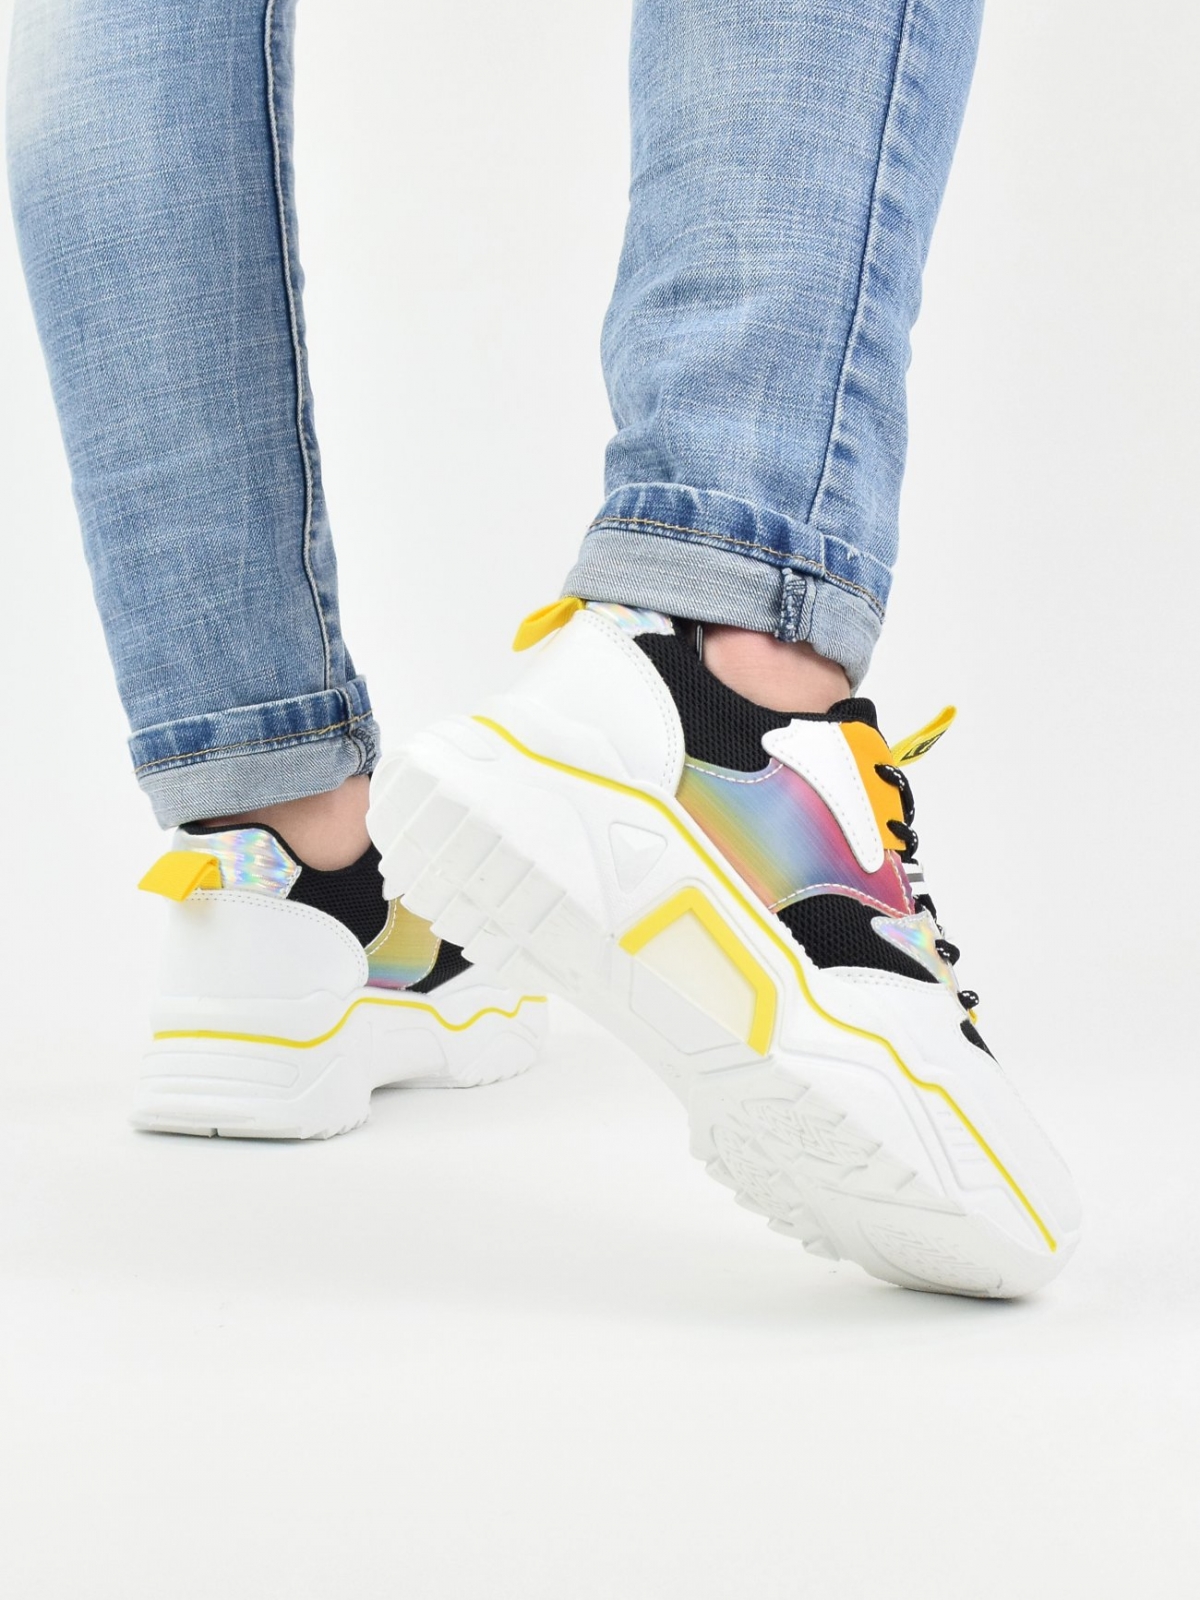 Stylish sneakers with holographic details in yellow